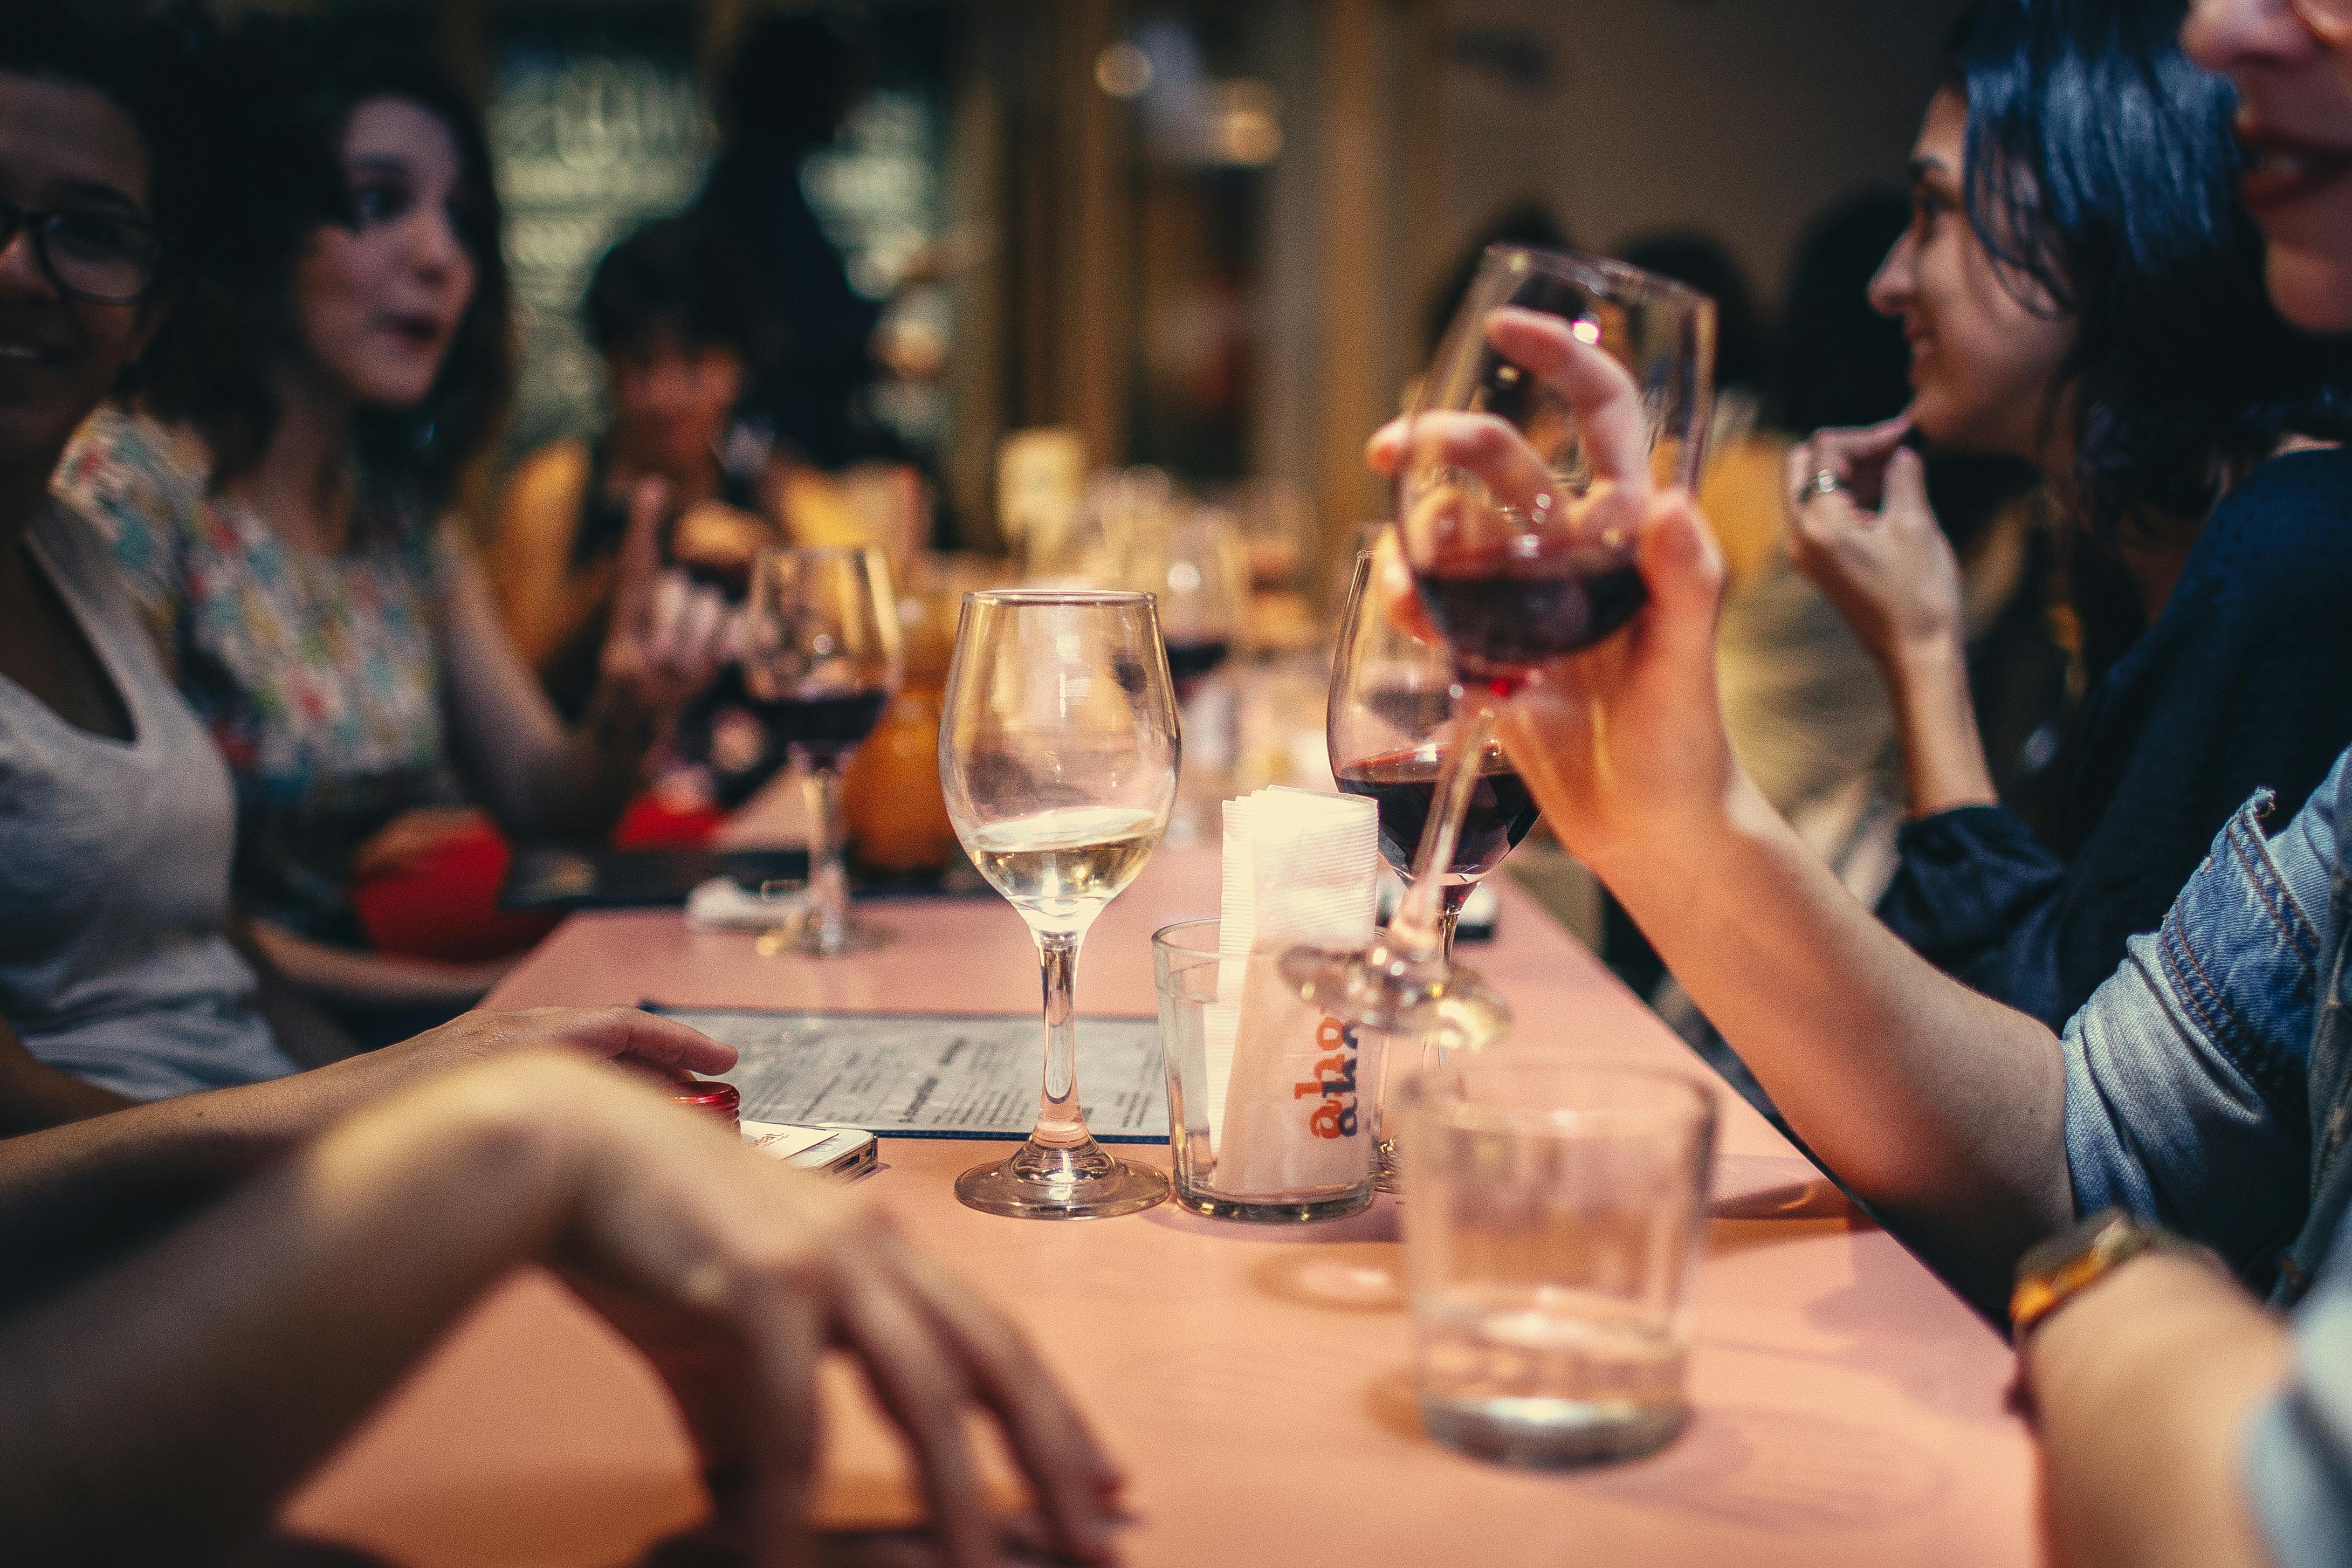 A group of people having drinks at a restaurant | Source: Pexels